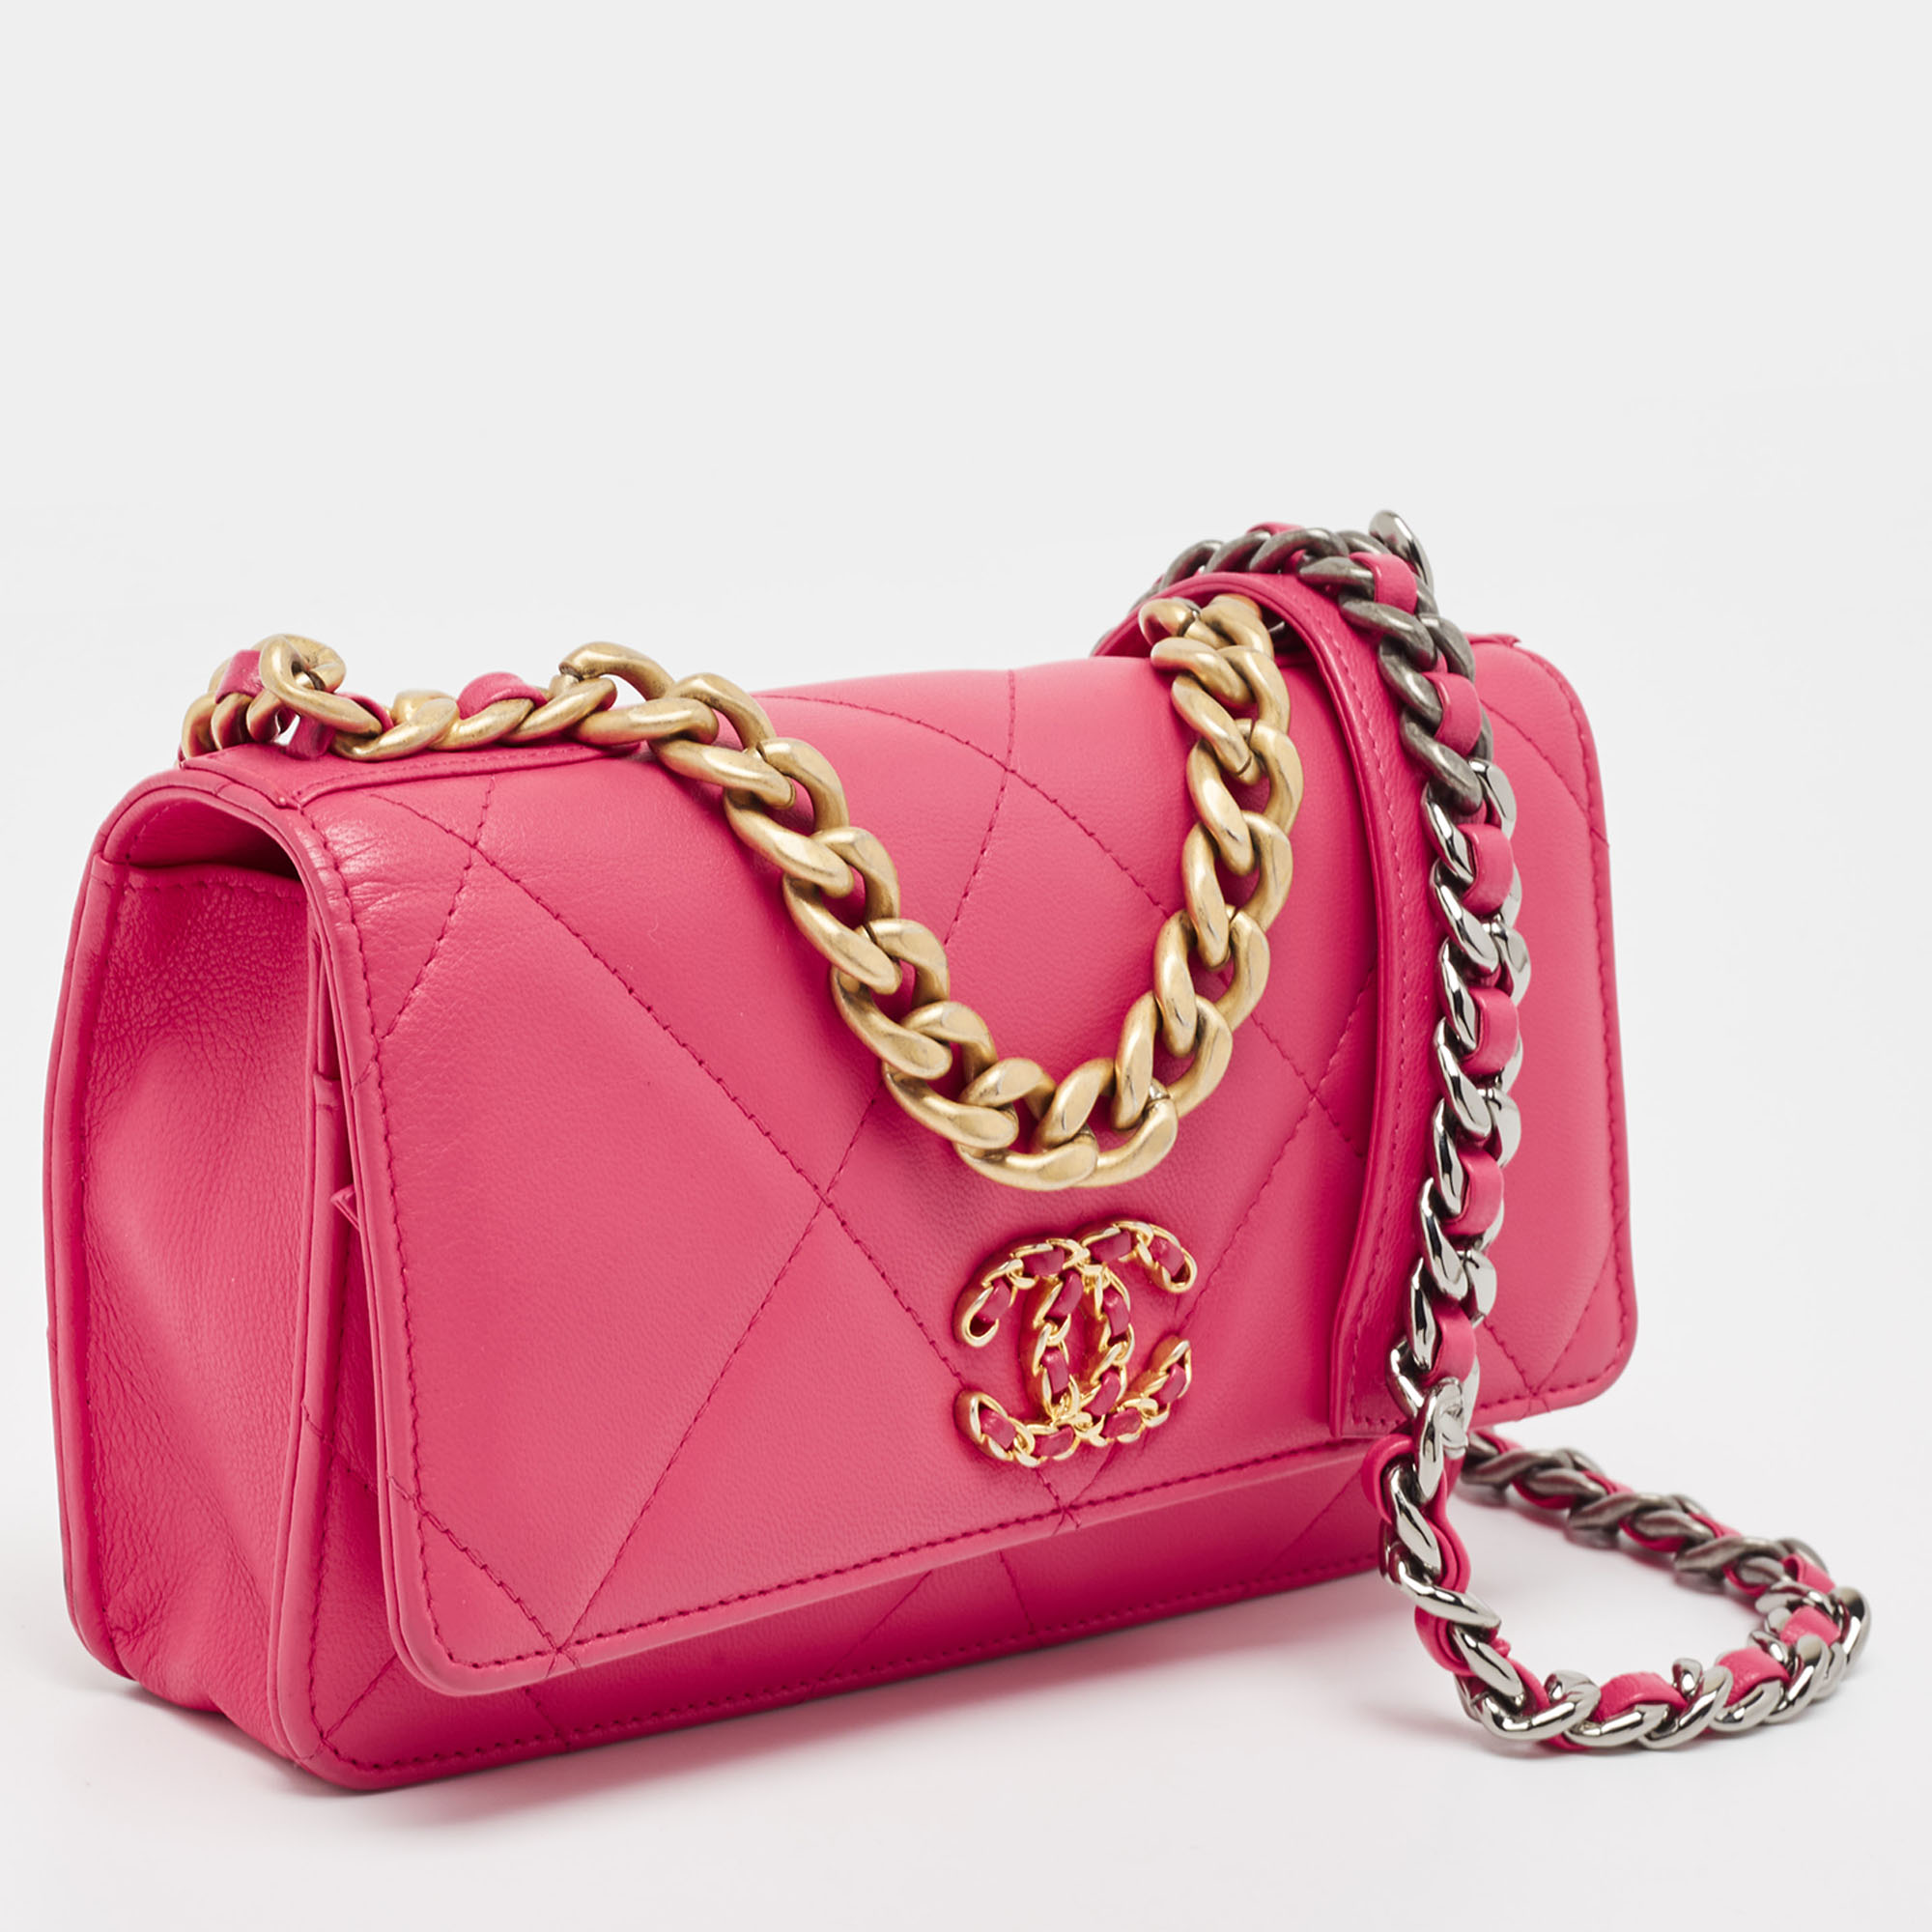 Chanel Pink Quilted Leather Chanel 19 Wallet On Chain